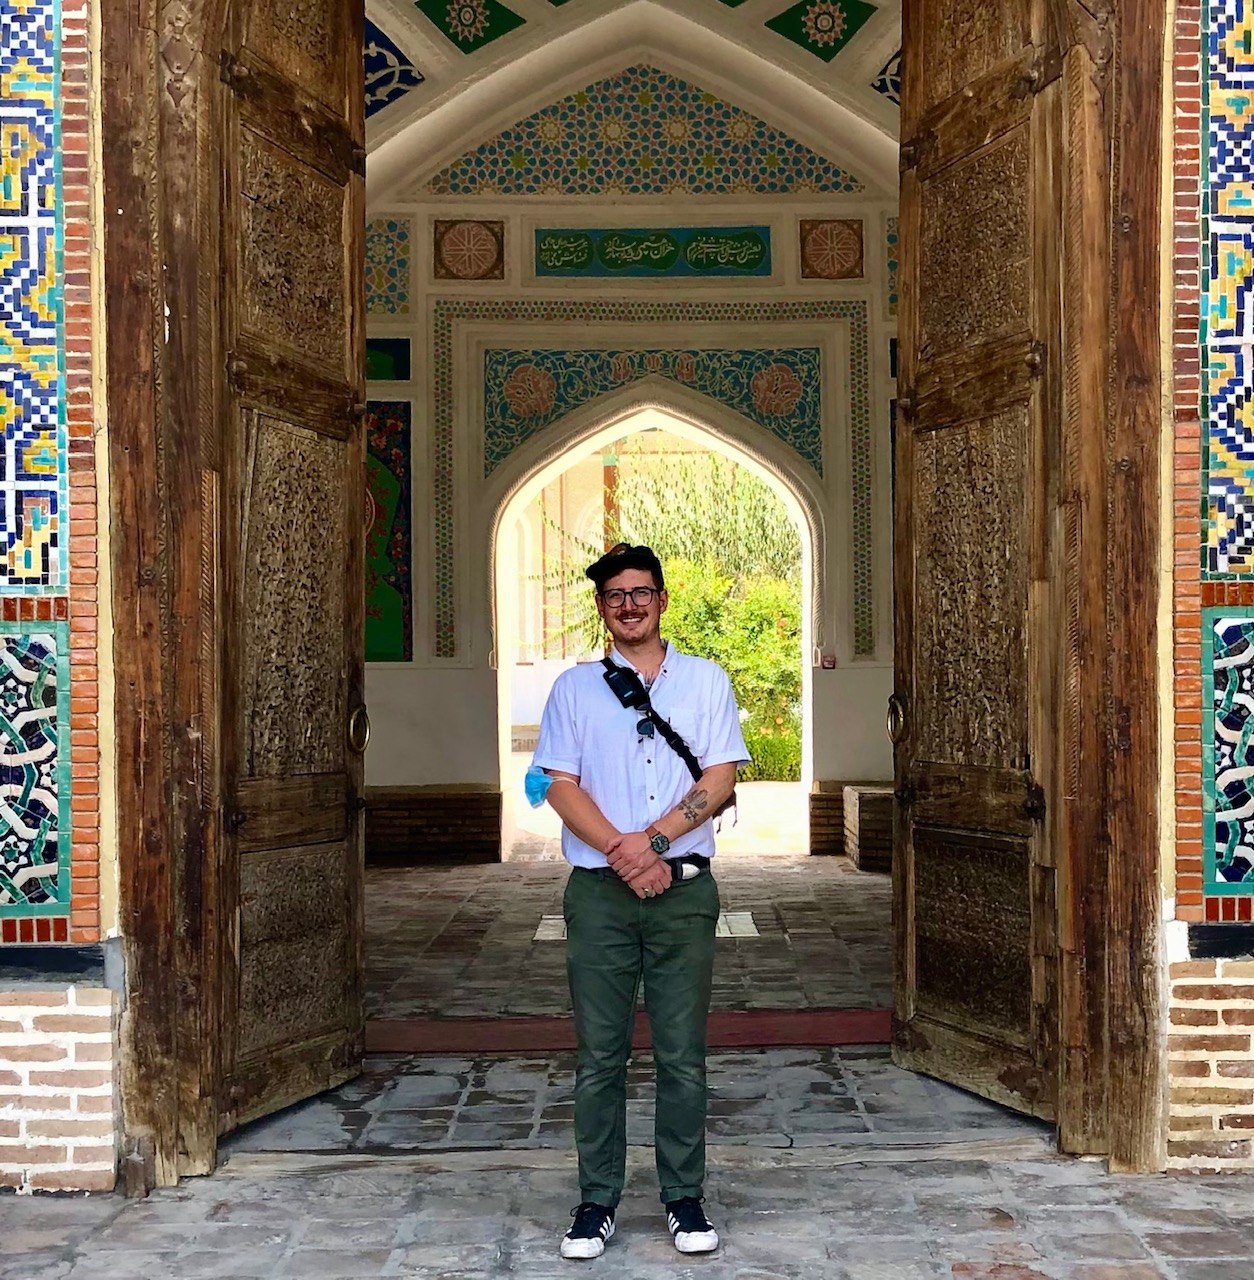 A picture of Matt Brown standing in front of an ornate, large doorway in Central Asia